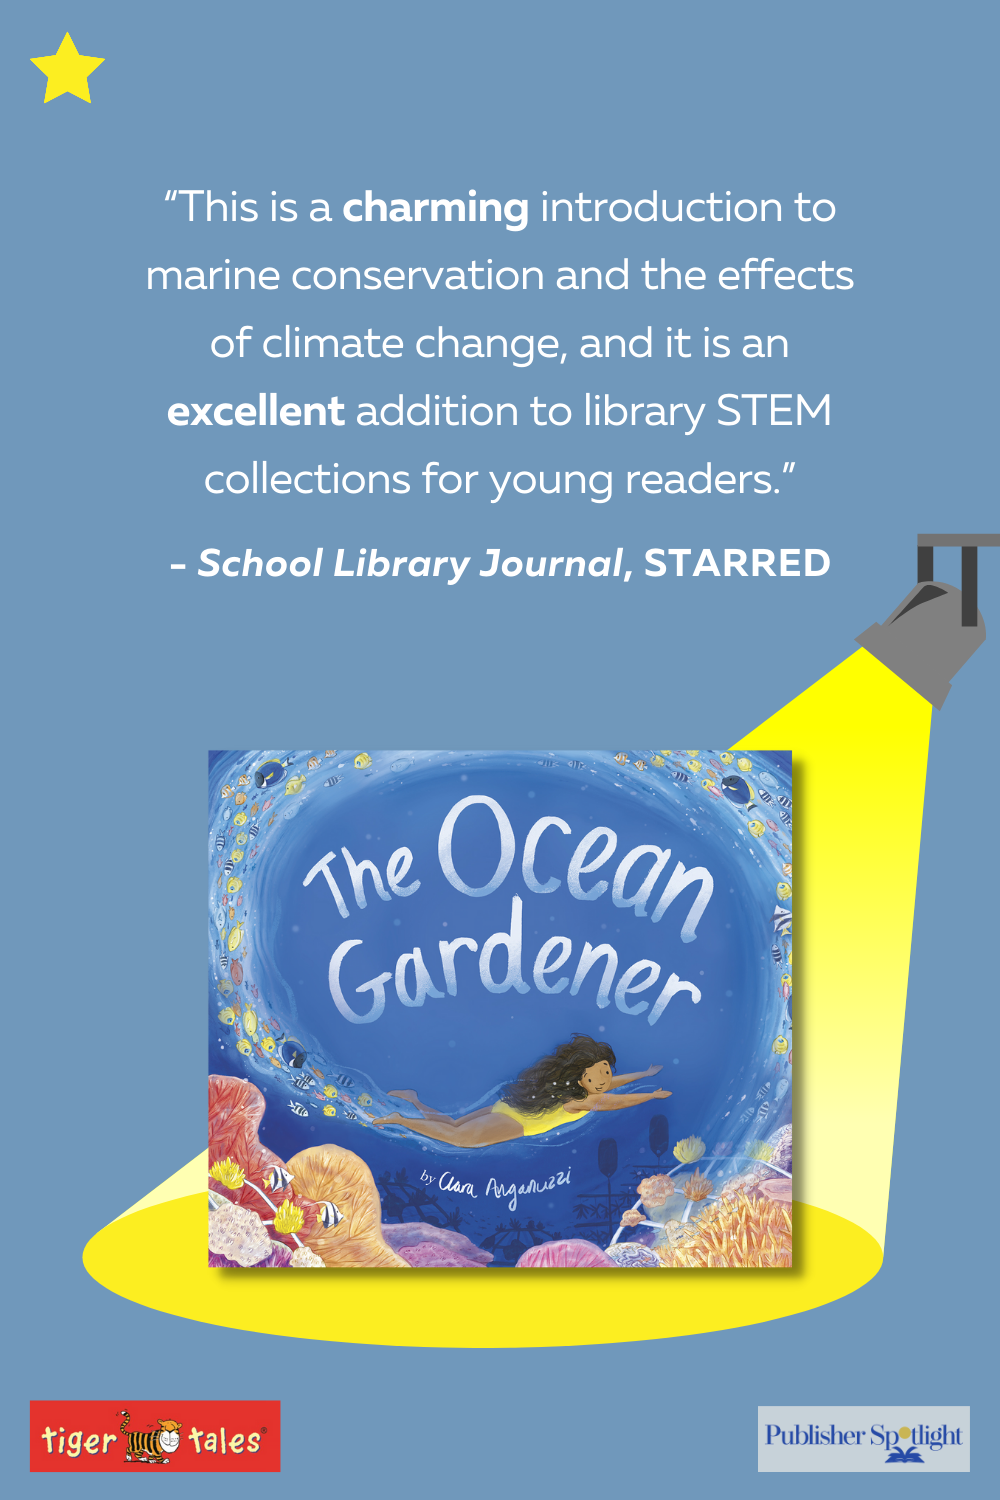 The Ocean Gardener cover image on tall graphic showing star status